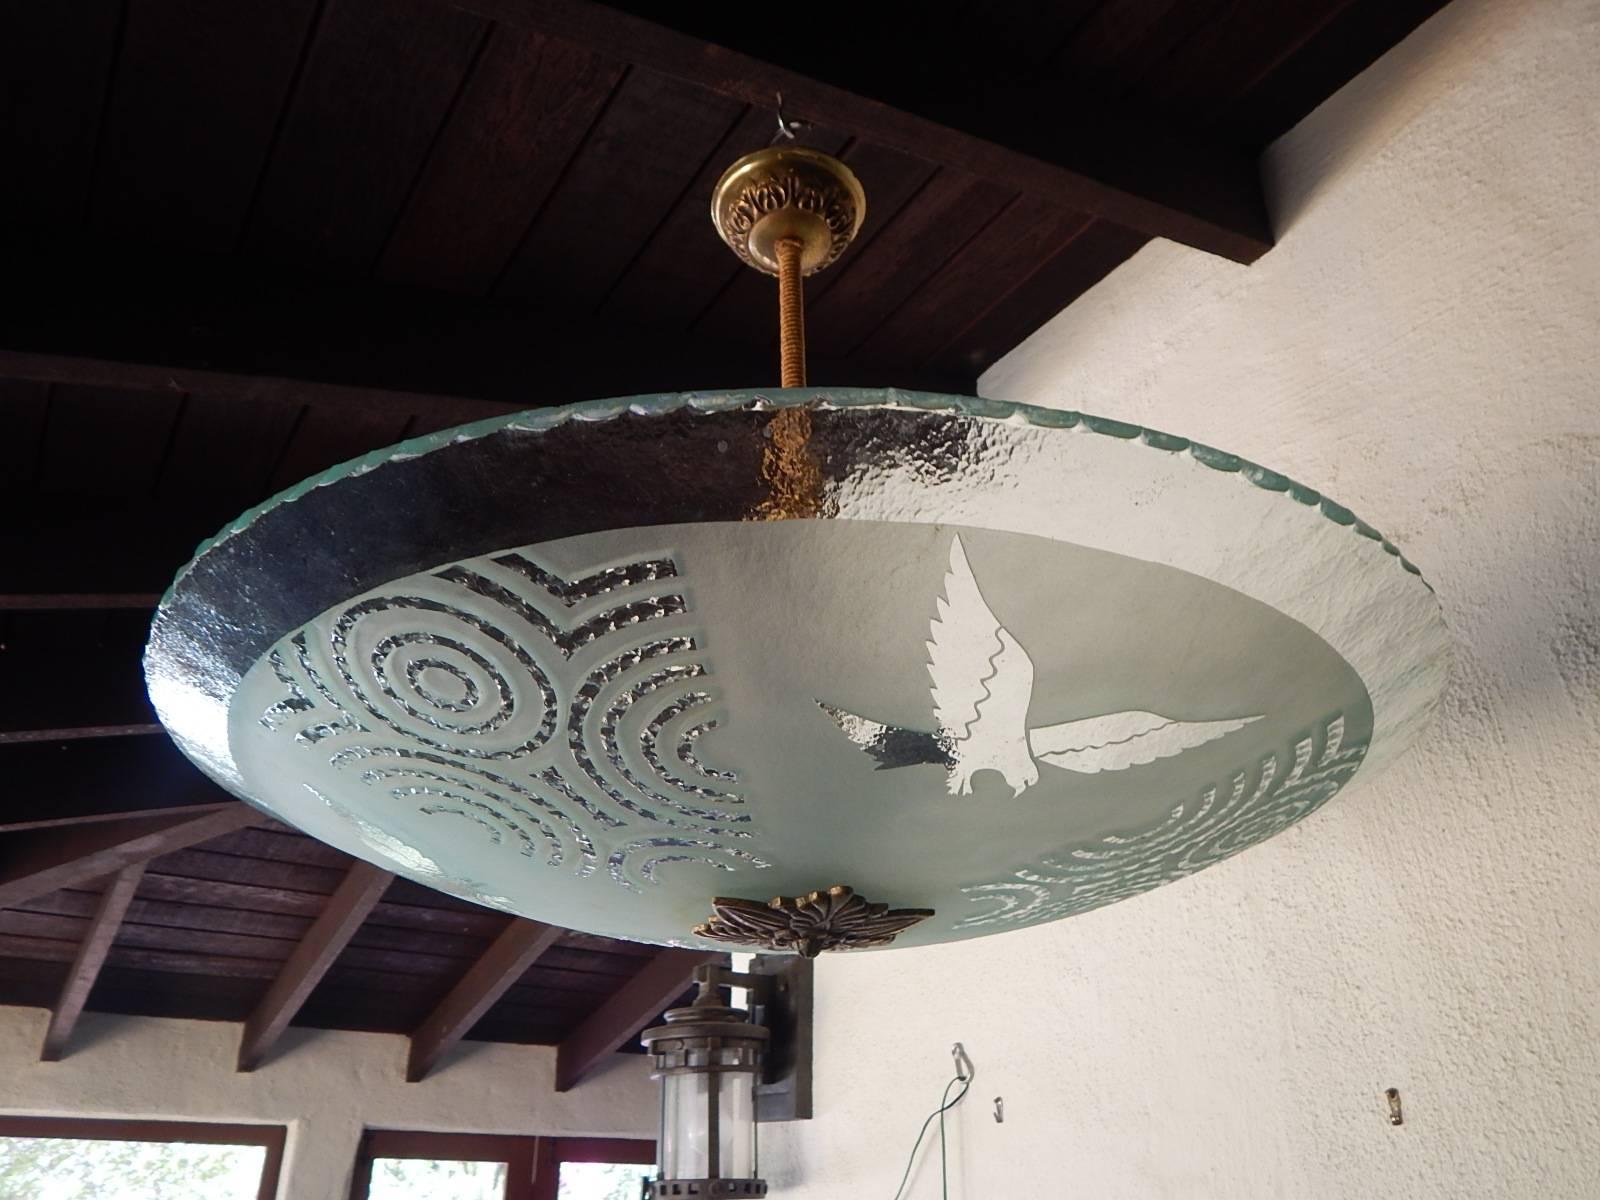 Swedish Art Deco Etched Glass Lighting Fixture with Eagle Motif, circa 1930 For Sale 1